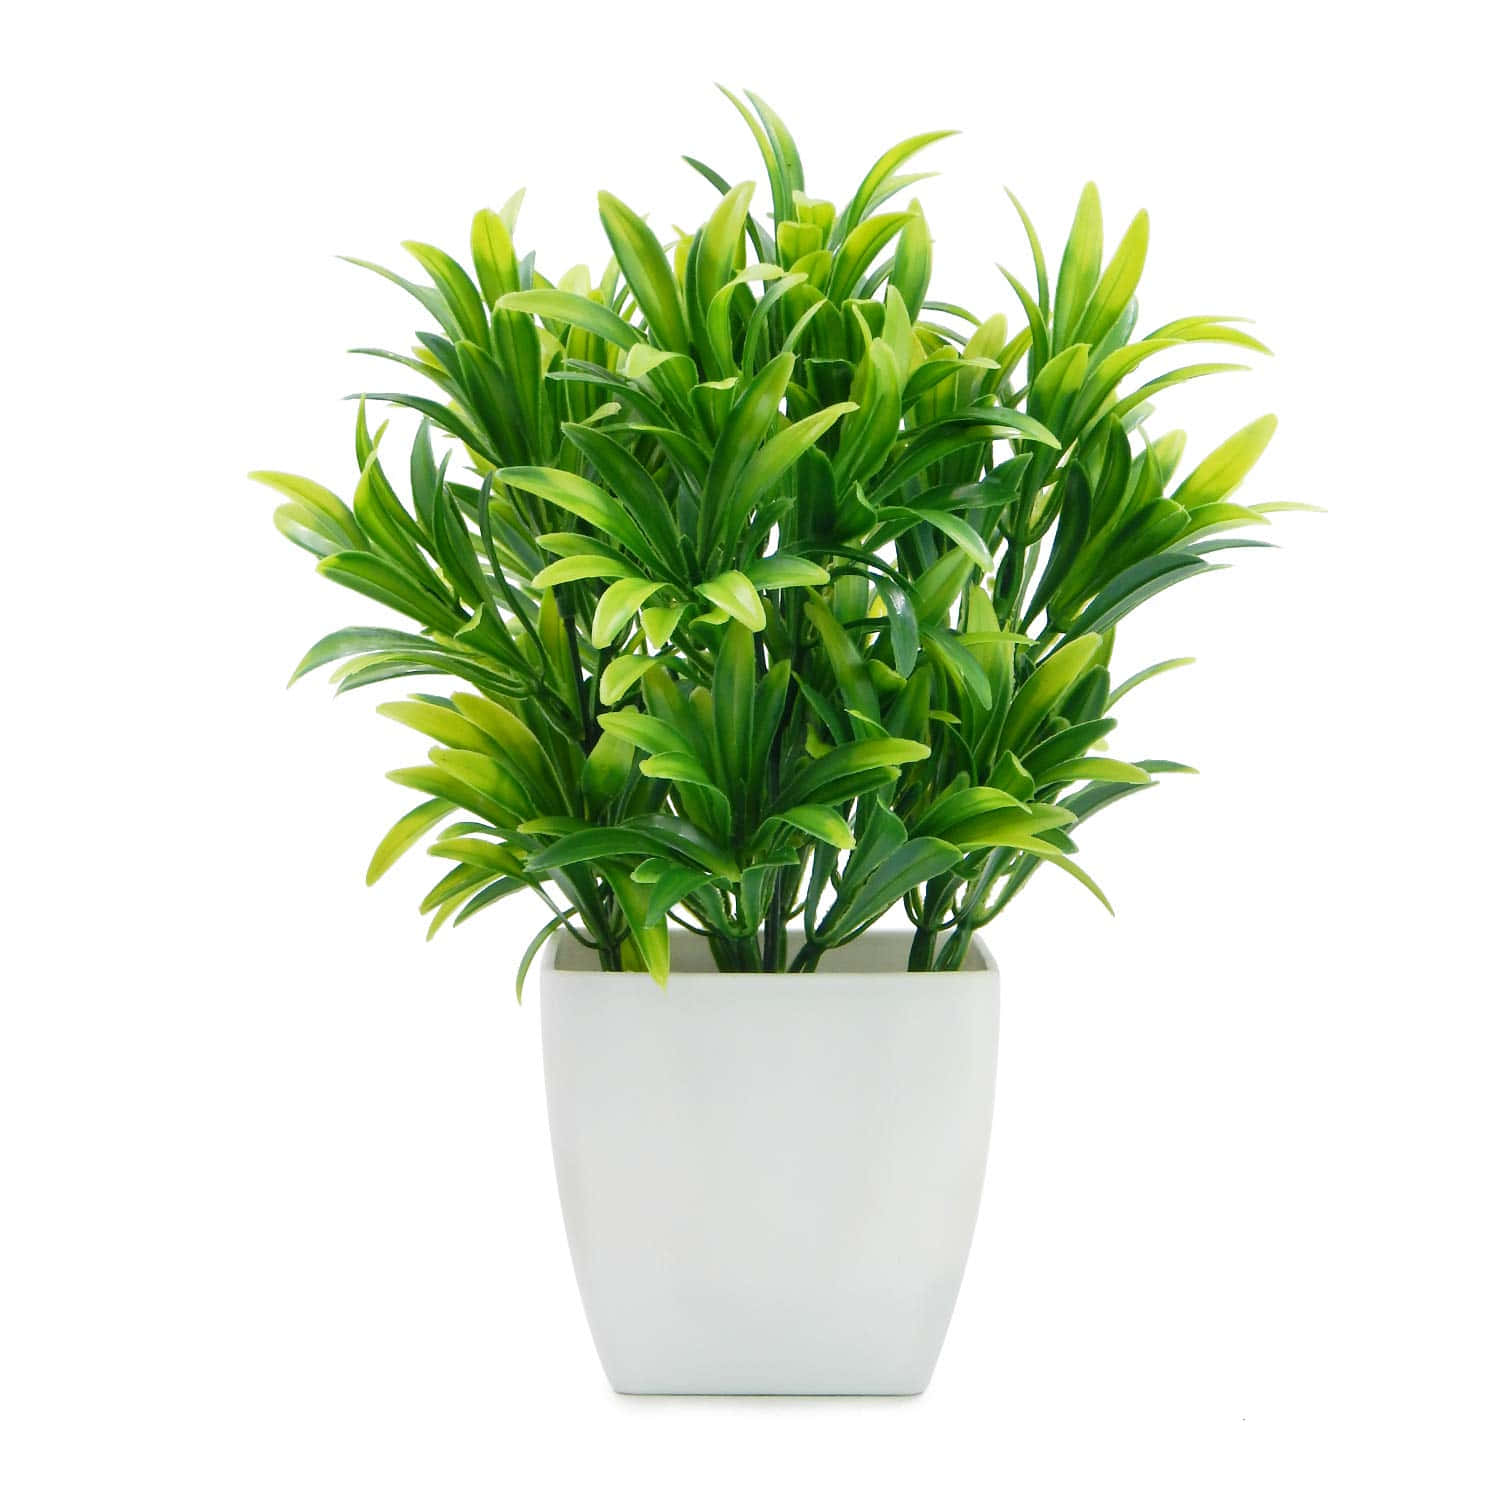 Lush Green Plant with Vibrant Leaves Wallpaper